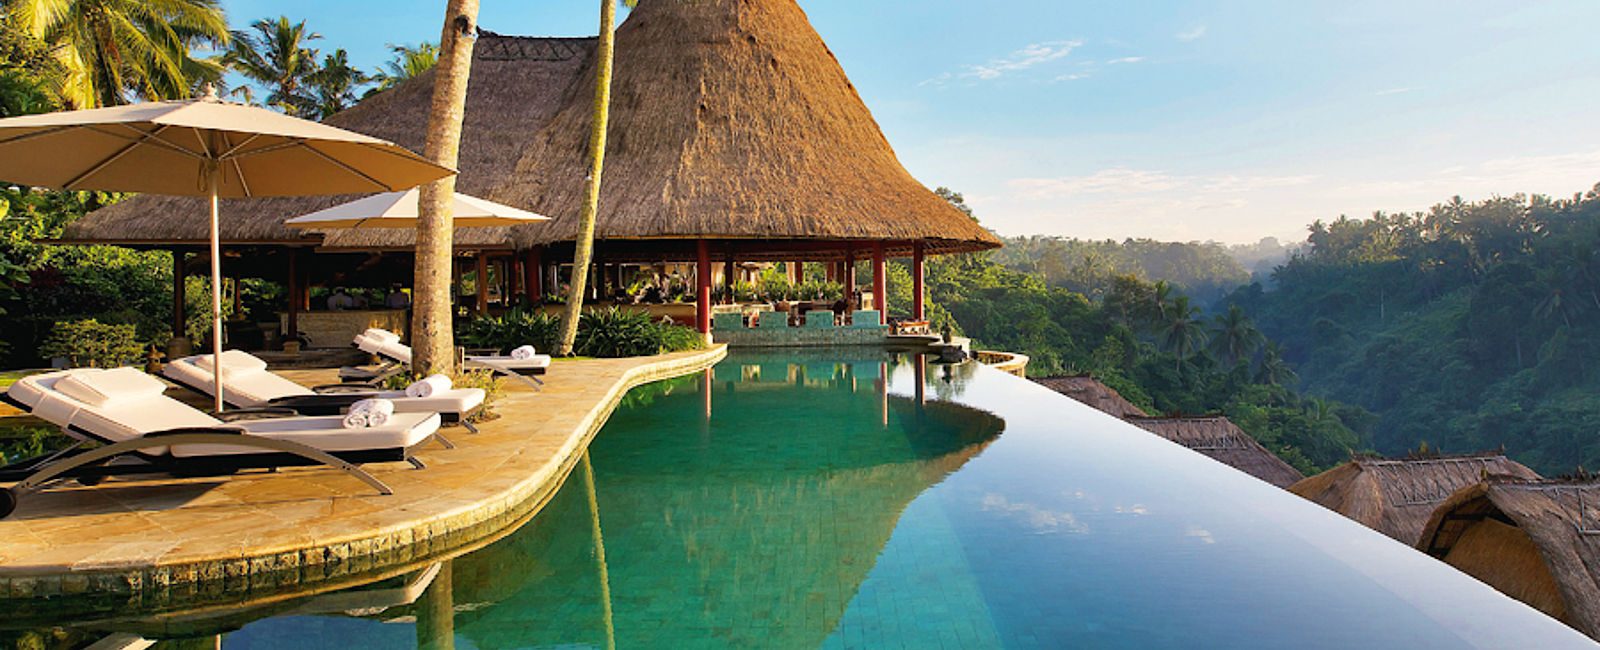 VERY SPECIAL HOTEL
 Viceroy Bali 
 Aussichtsreich 